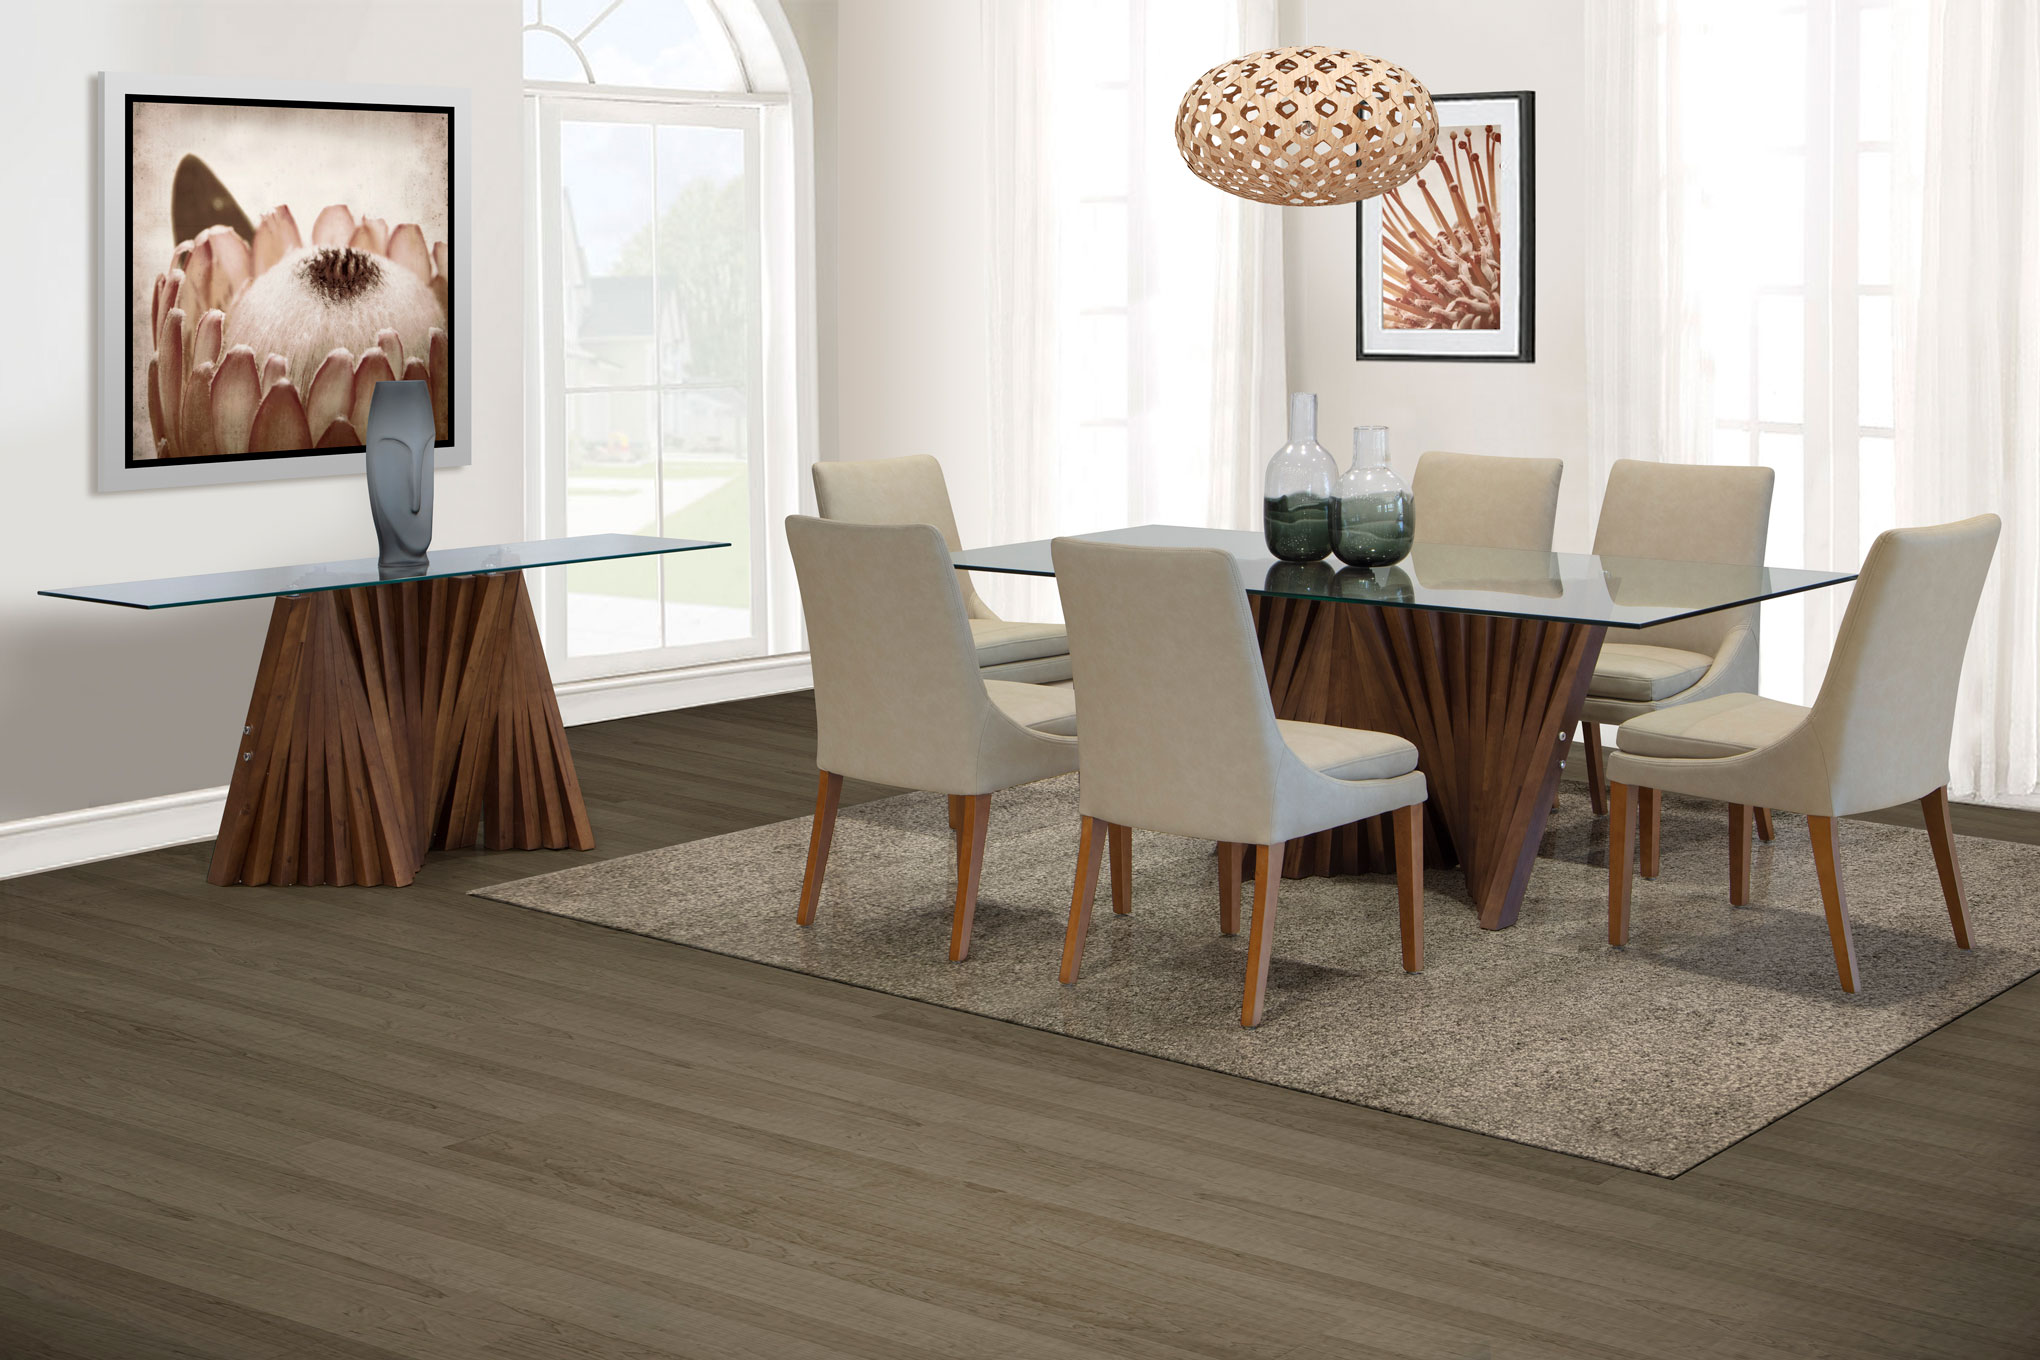 Sicily 7 Piece Dining Room Suite - Sedgars Home | Stunning Contemporary